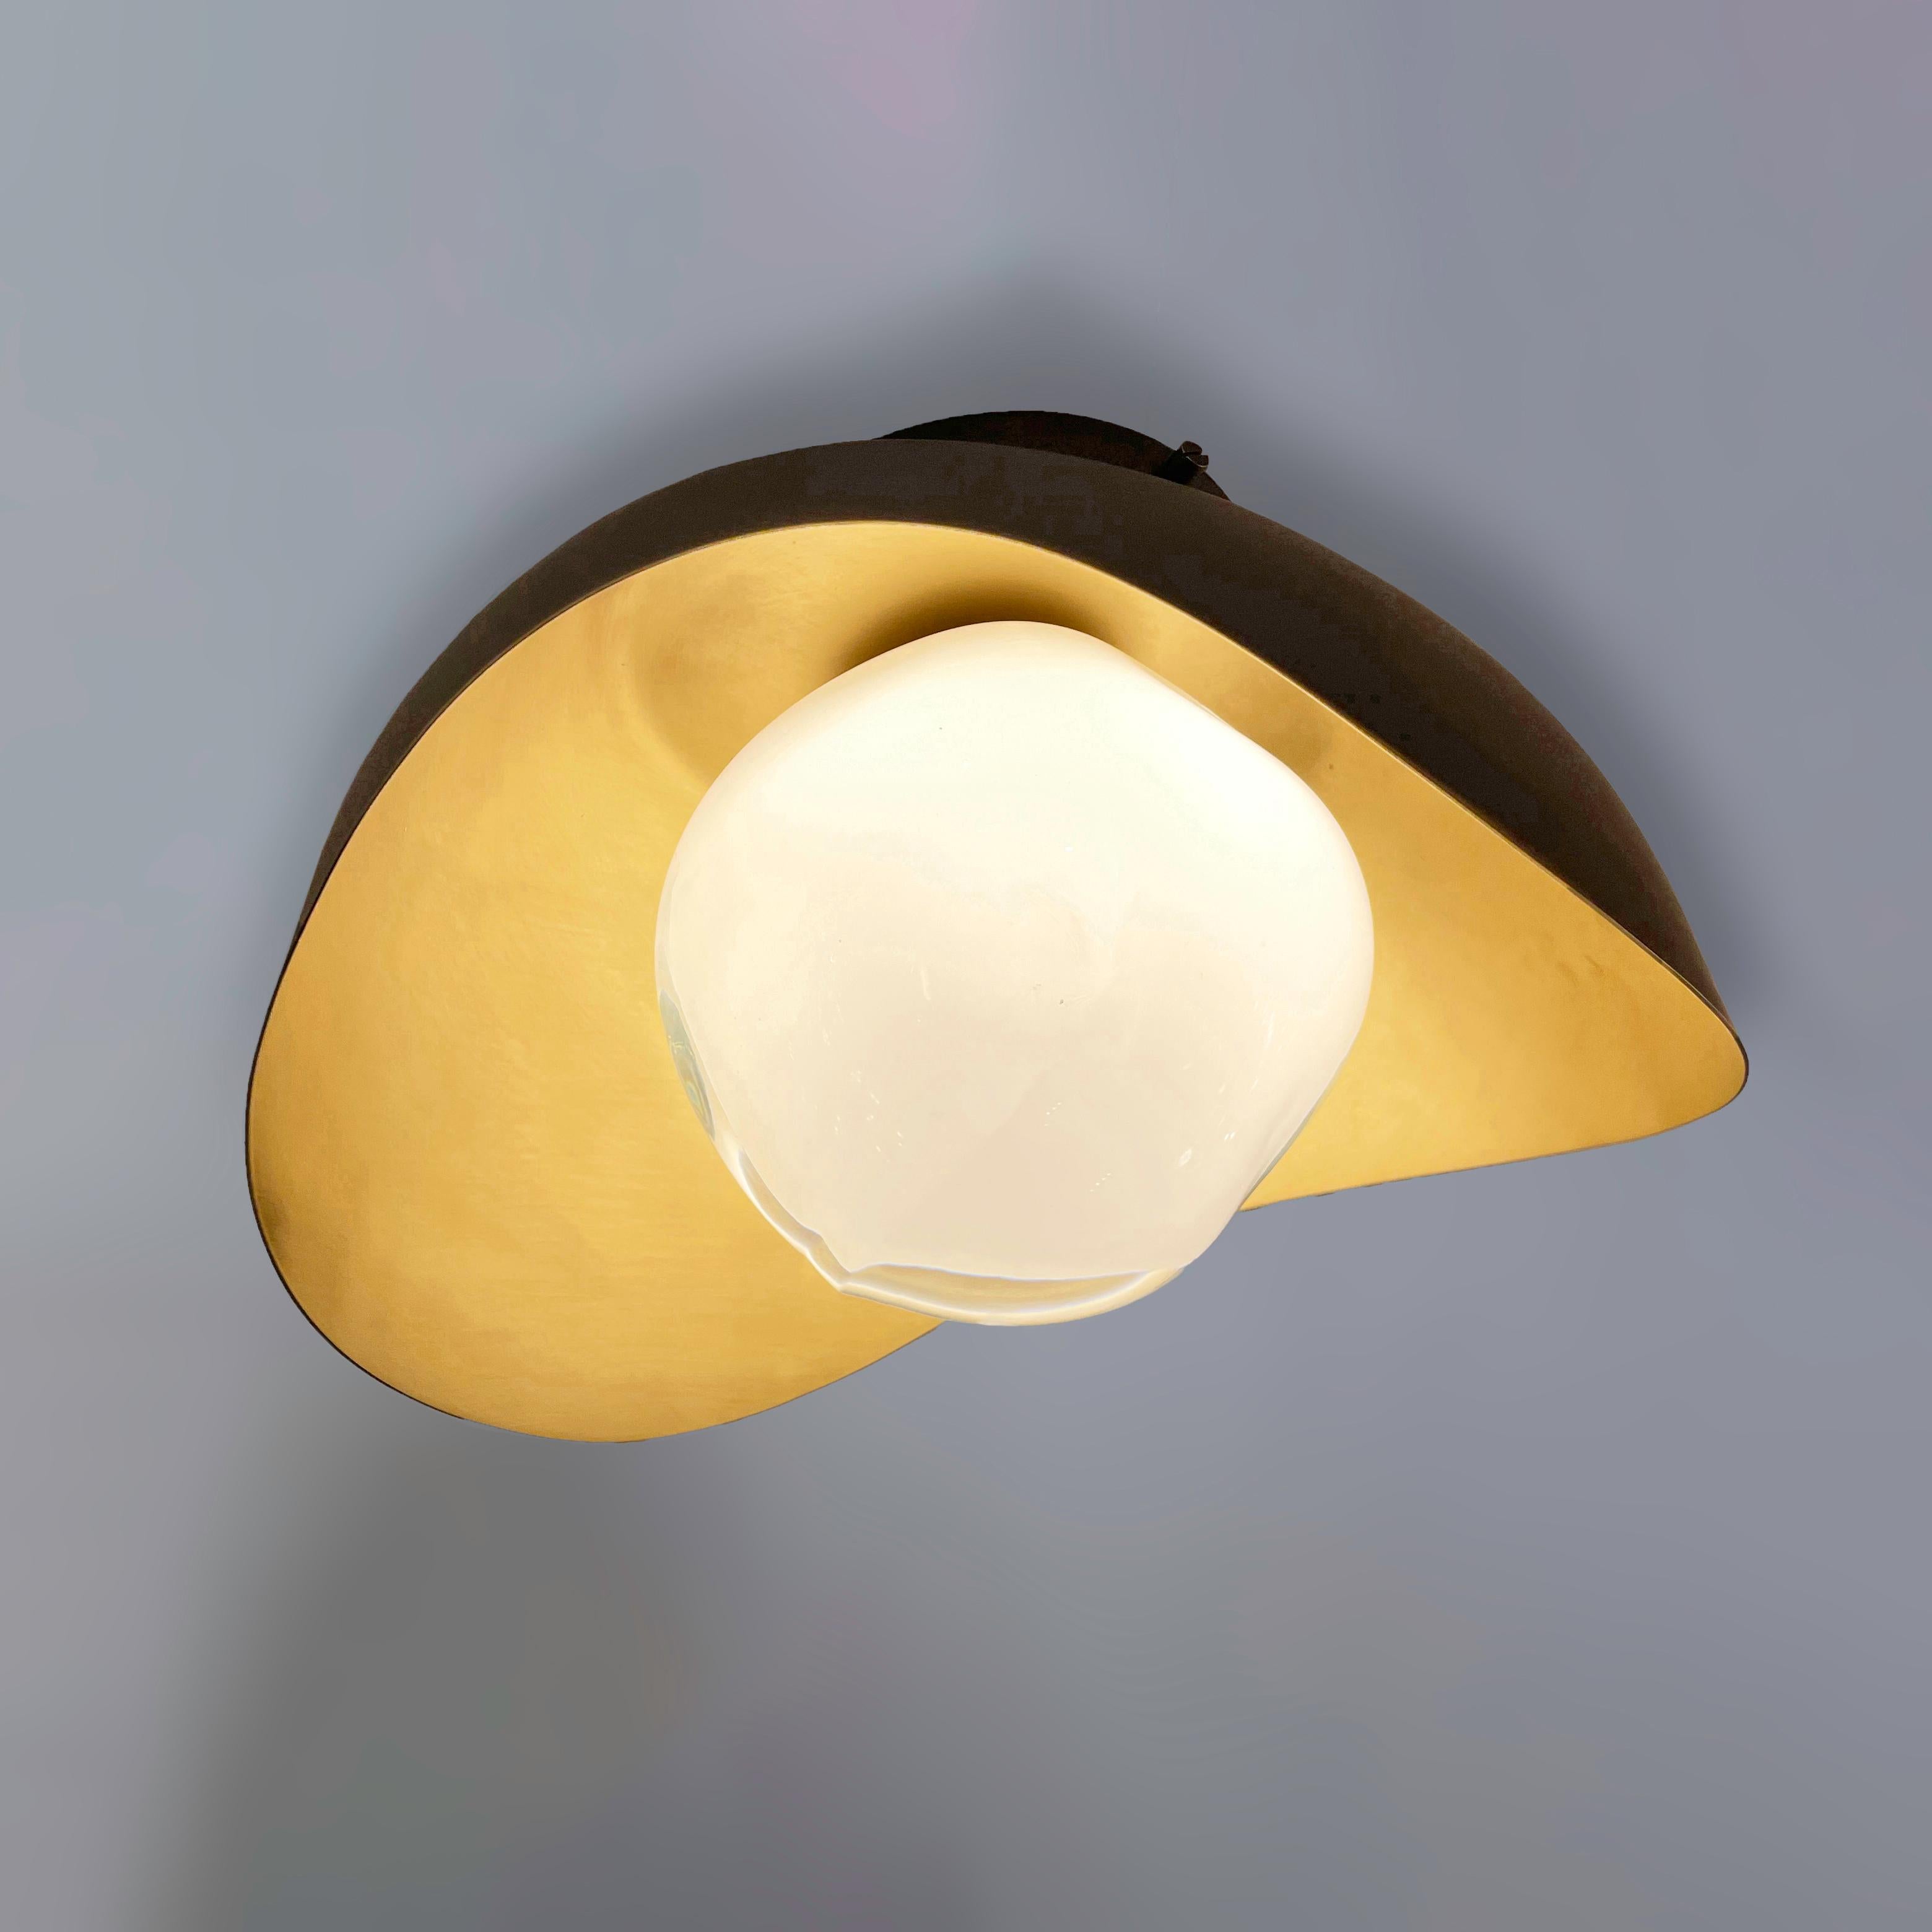 Brass Perla Flushmount Ceiling Light by Gaspare Asaro-Polished Copper/Sand White For Sale